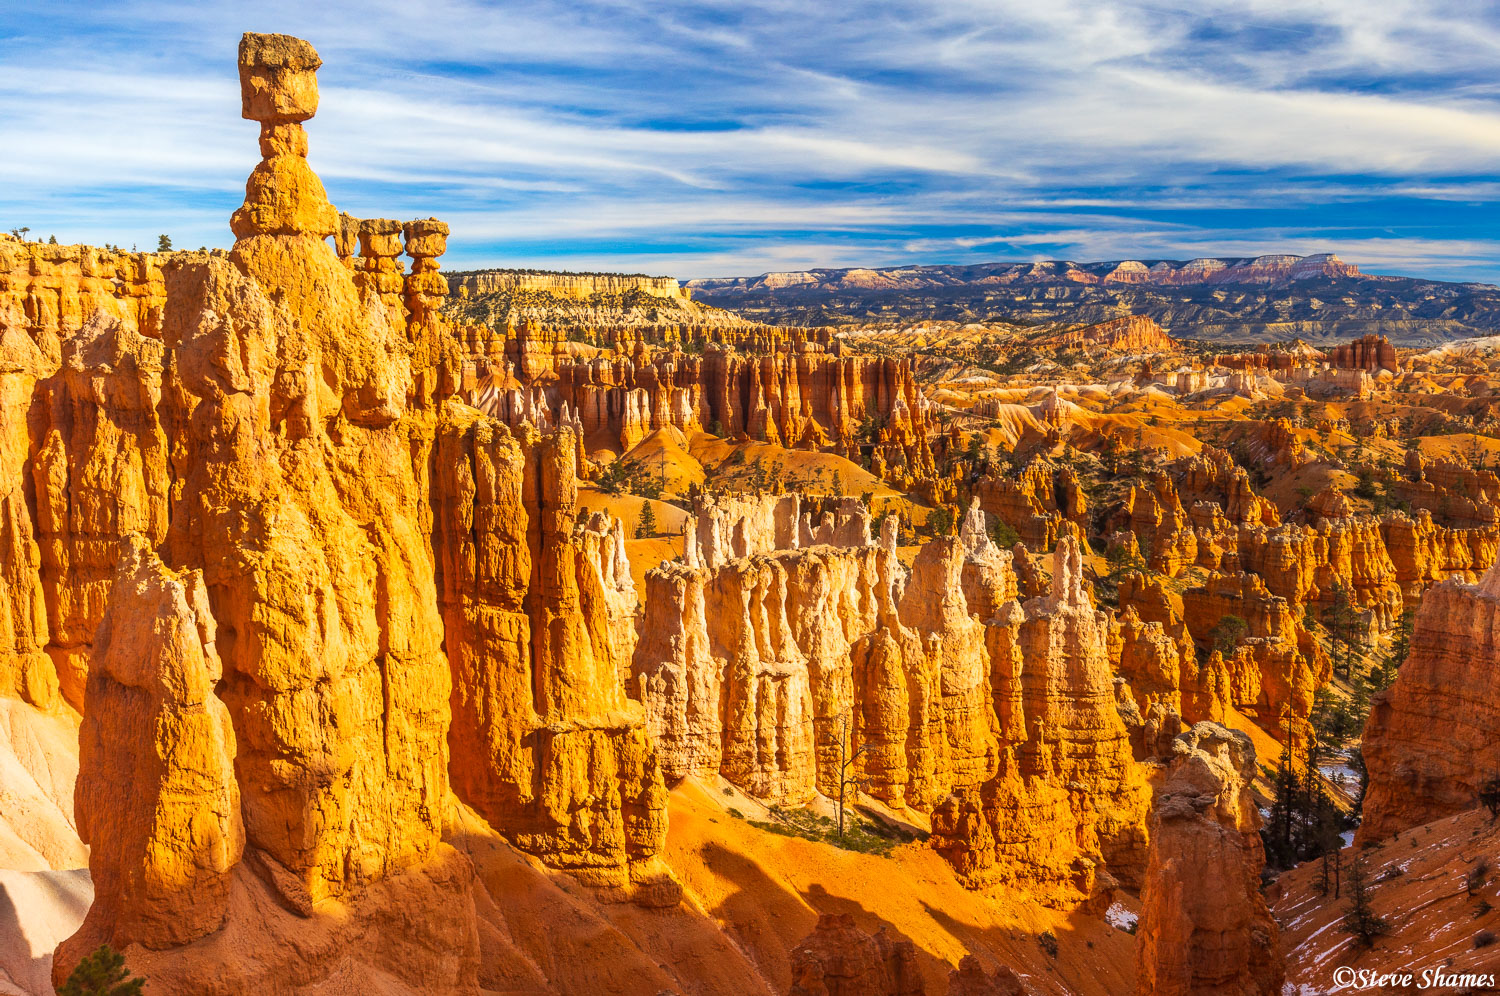 One of my favorite spots at Bryce Canyon. That tall hoodoo on the left is called "Thor's Hammer"